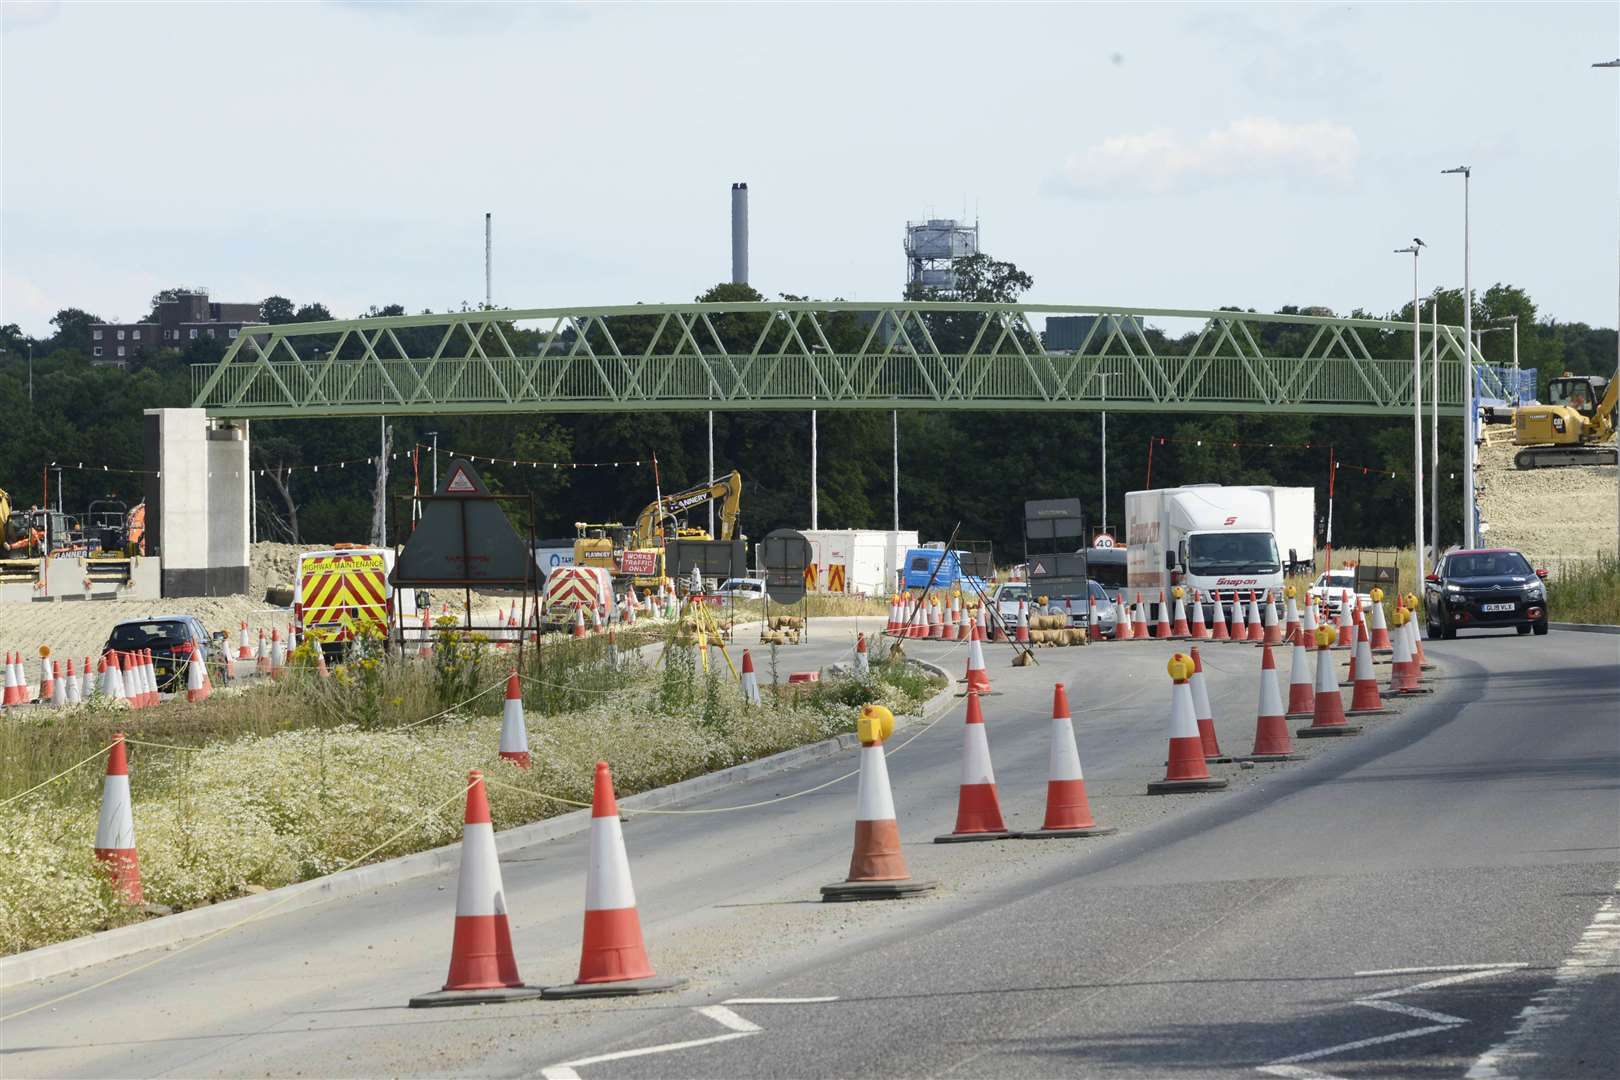 A new footbridge has gone in over the A2070 near TK Maxx